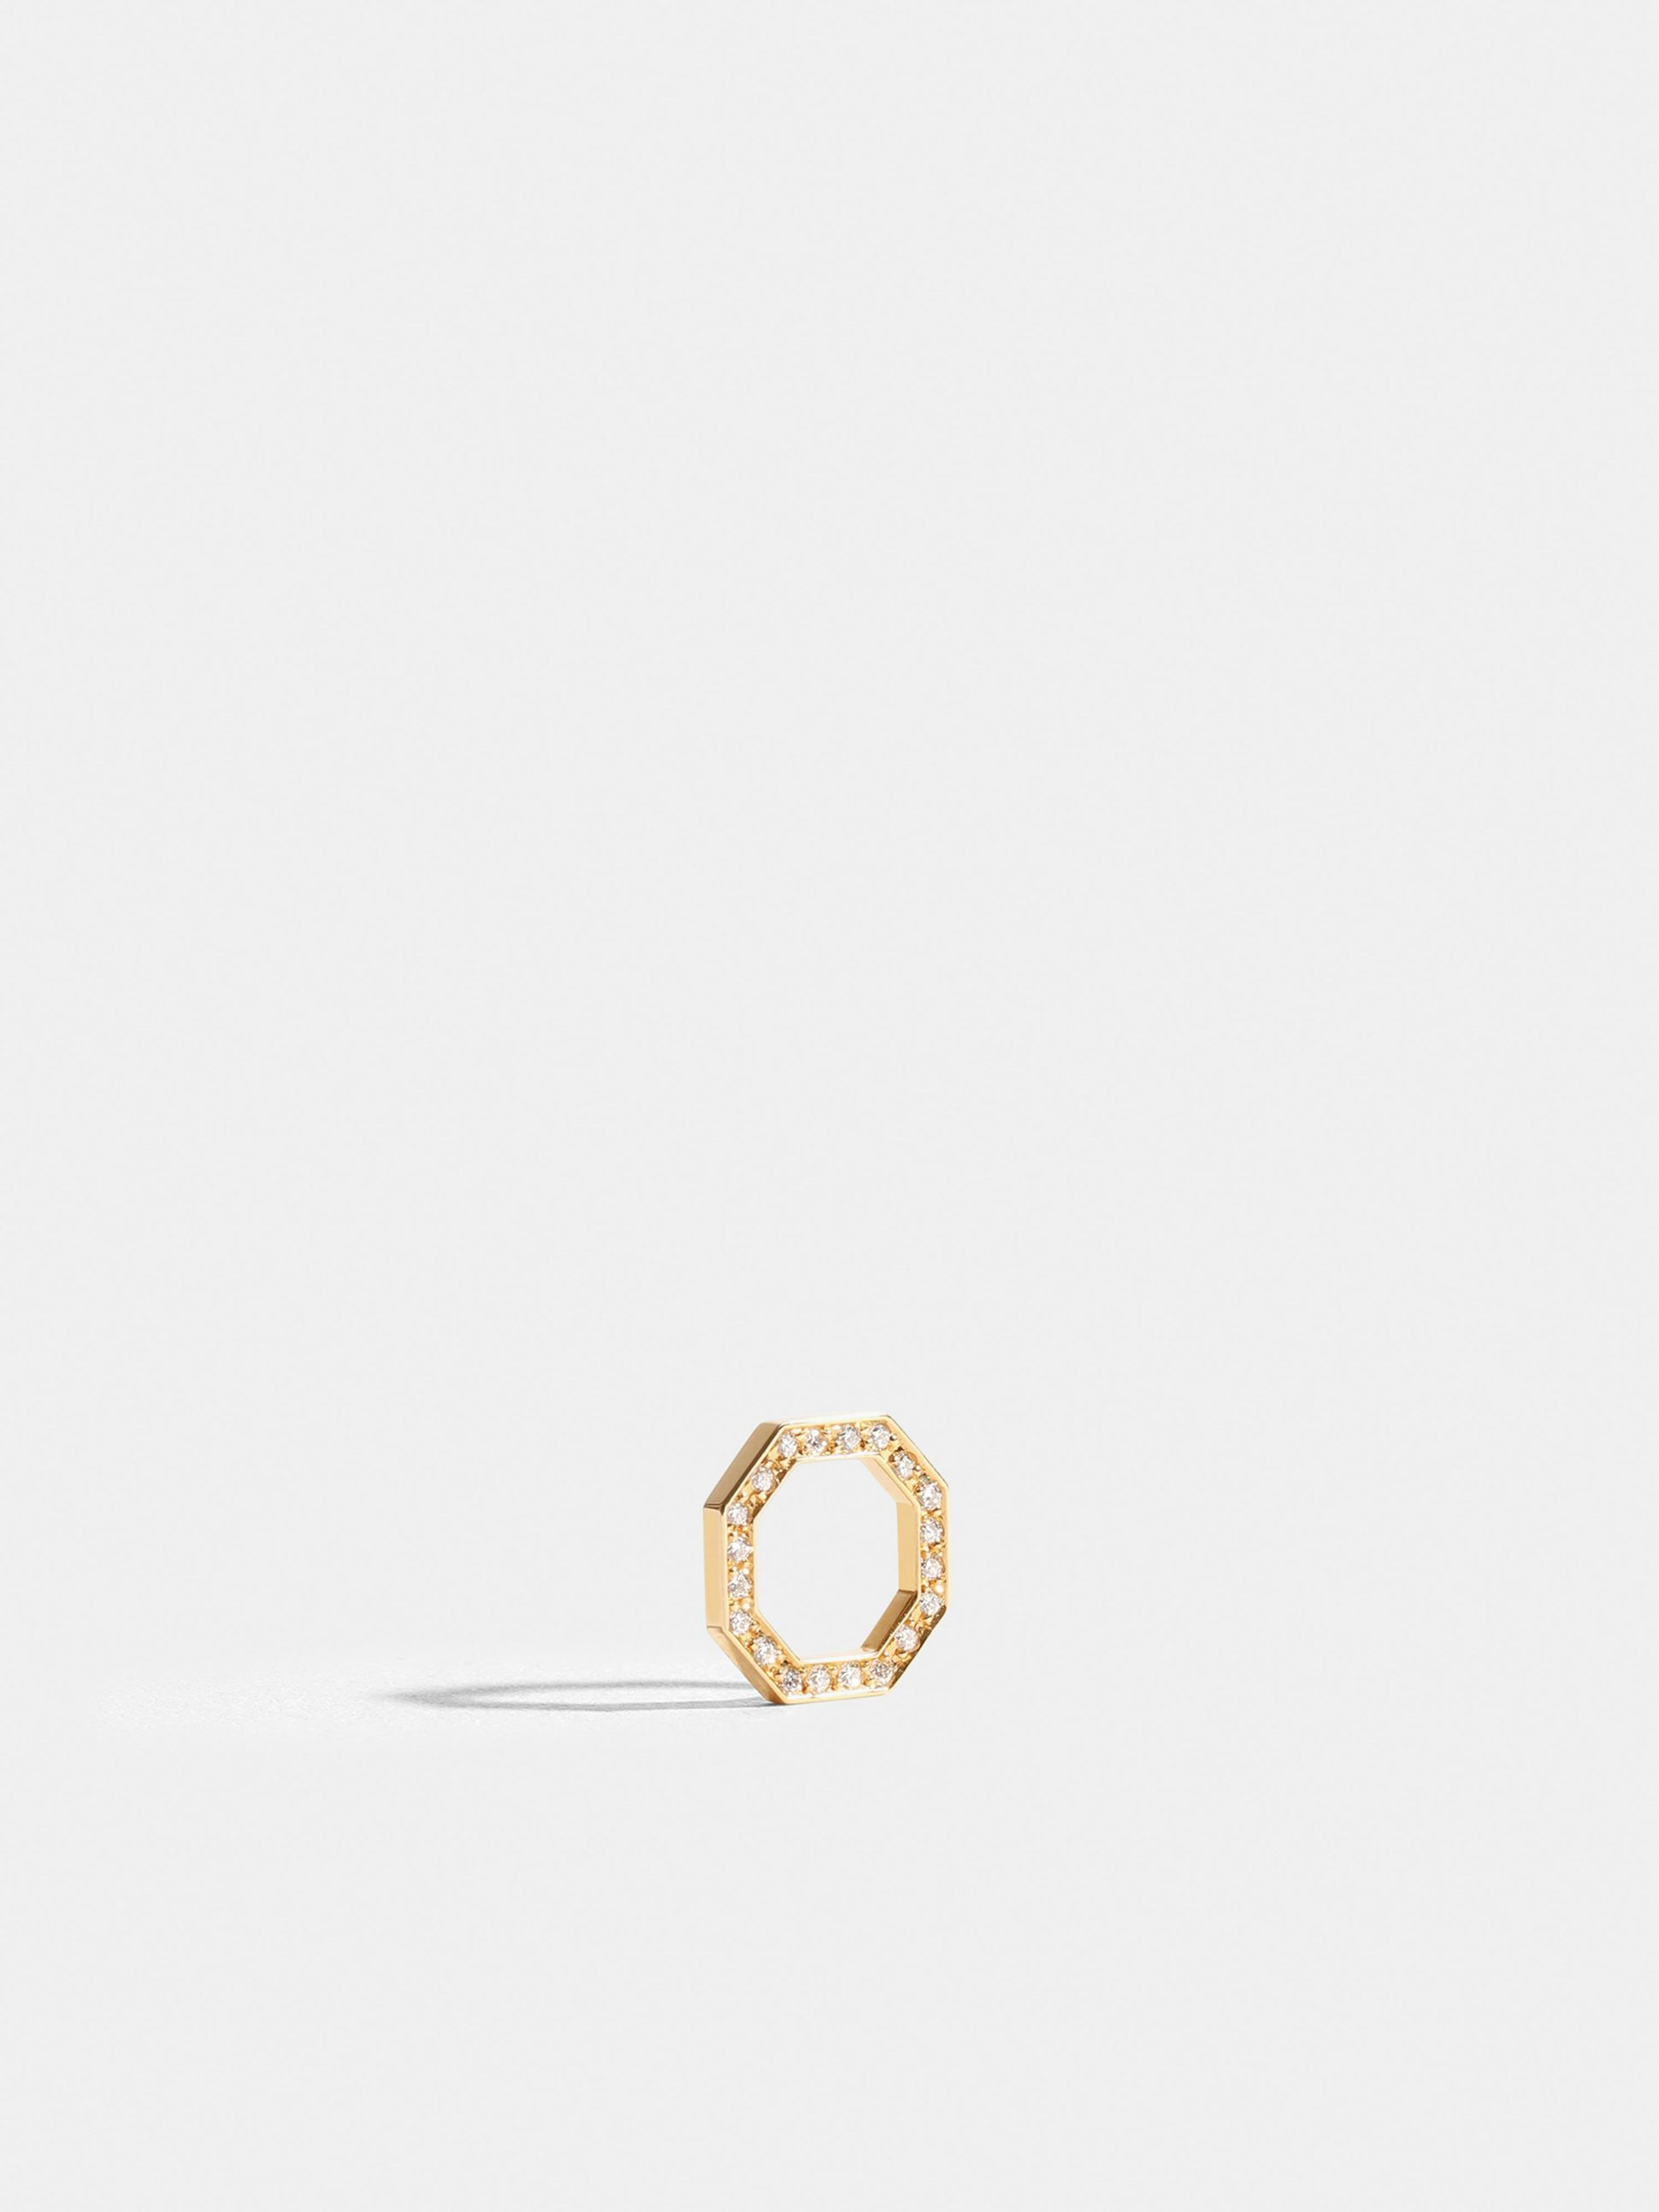 Octogone motif in 18k Fairmined ethical yellow gold, paved with lab-grown diamonds, on an antique pink cord.